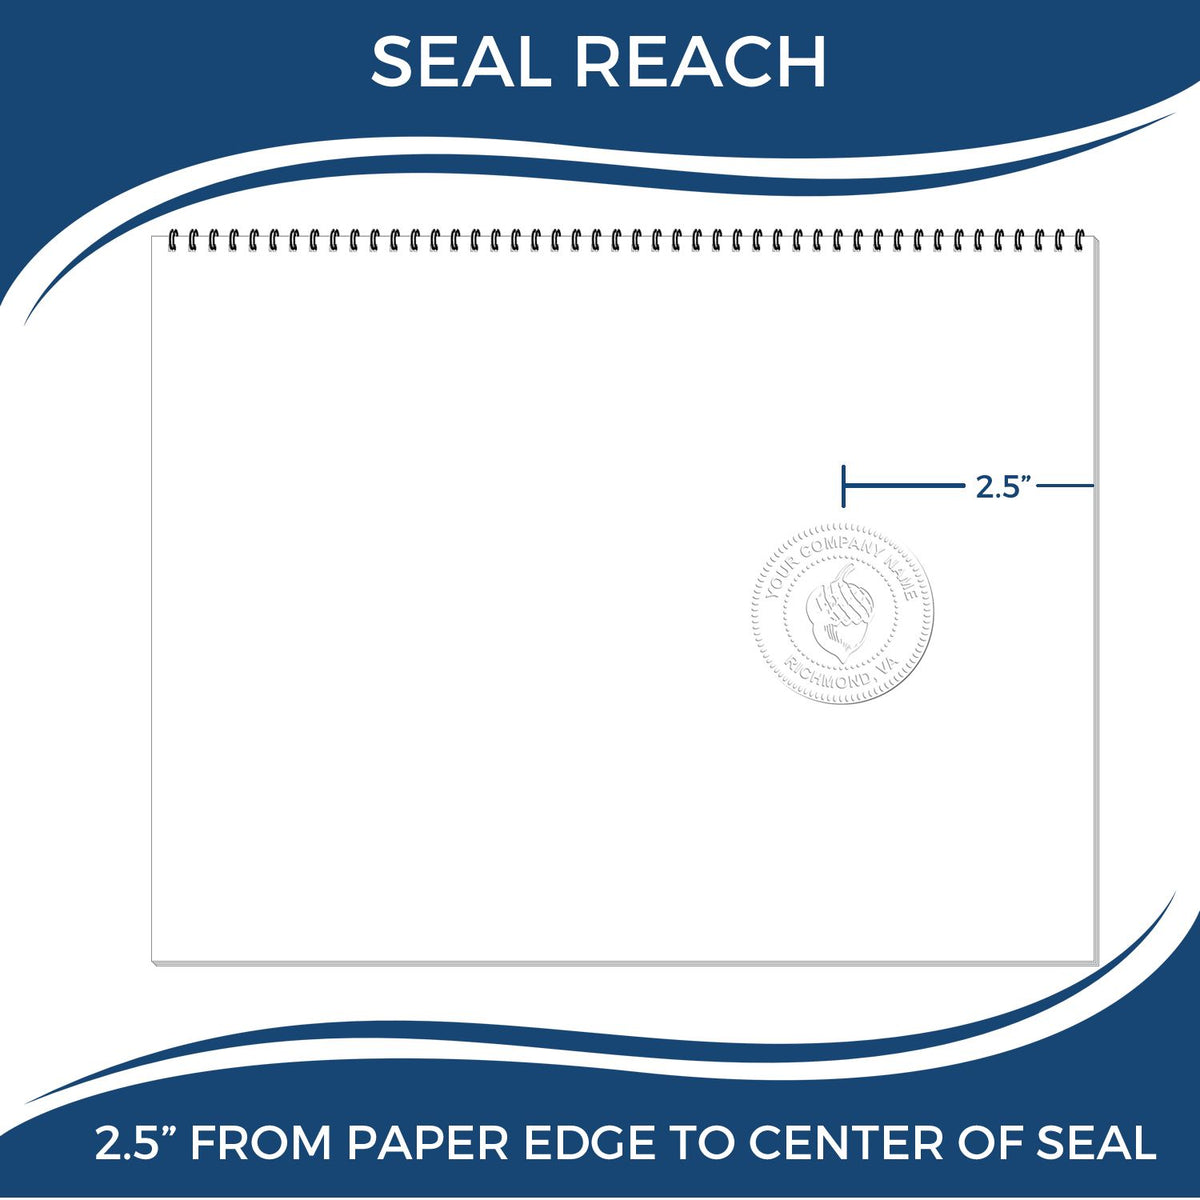 An infographic showing the seal reach which is represented by a ruler and a miniature seal image of the Heavy Duty Cast Iron New Mexico Geologist Seal Embosser